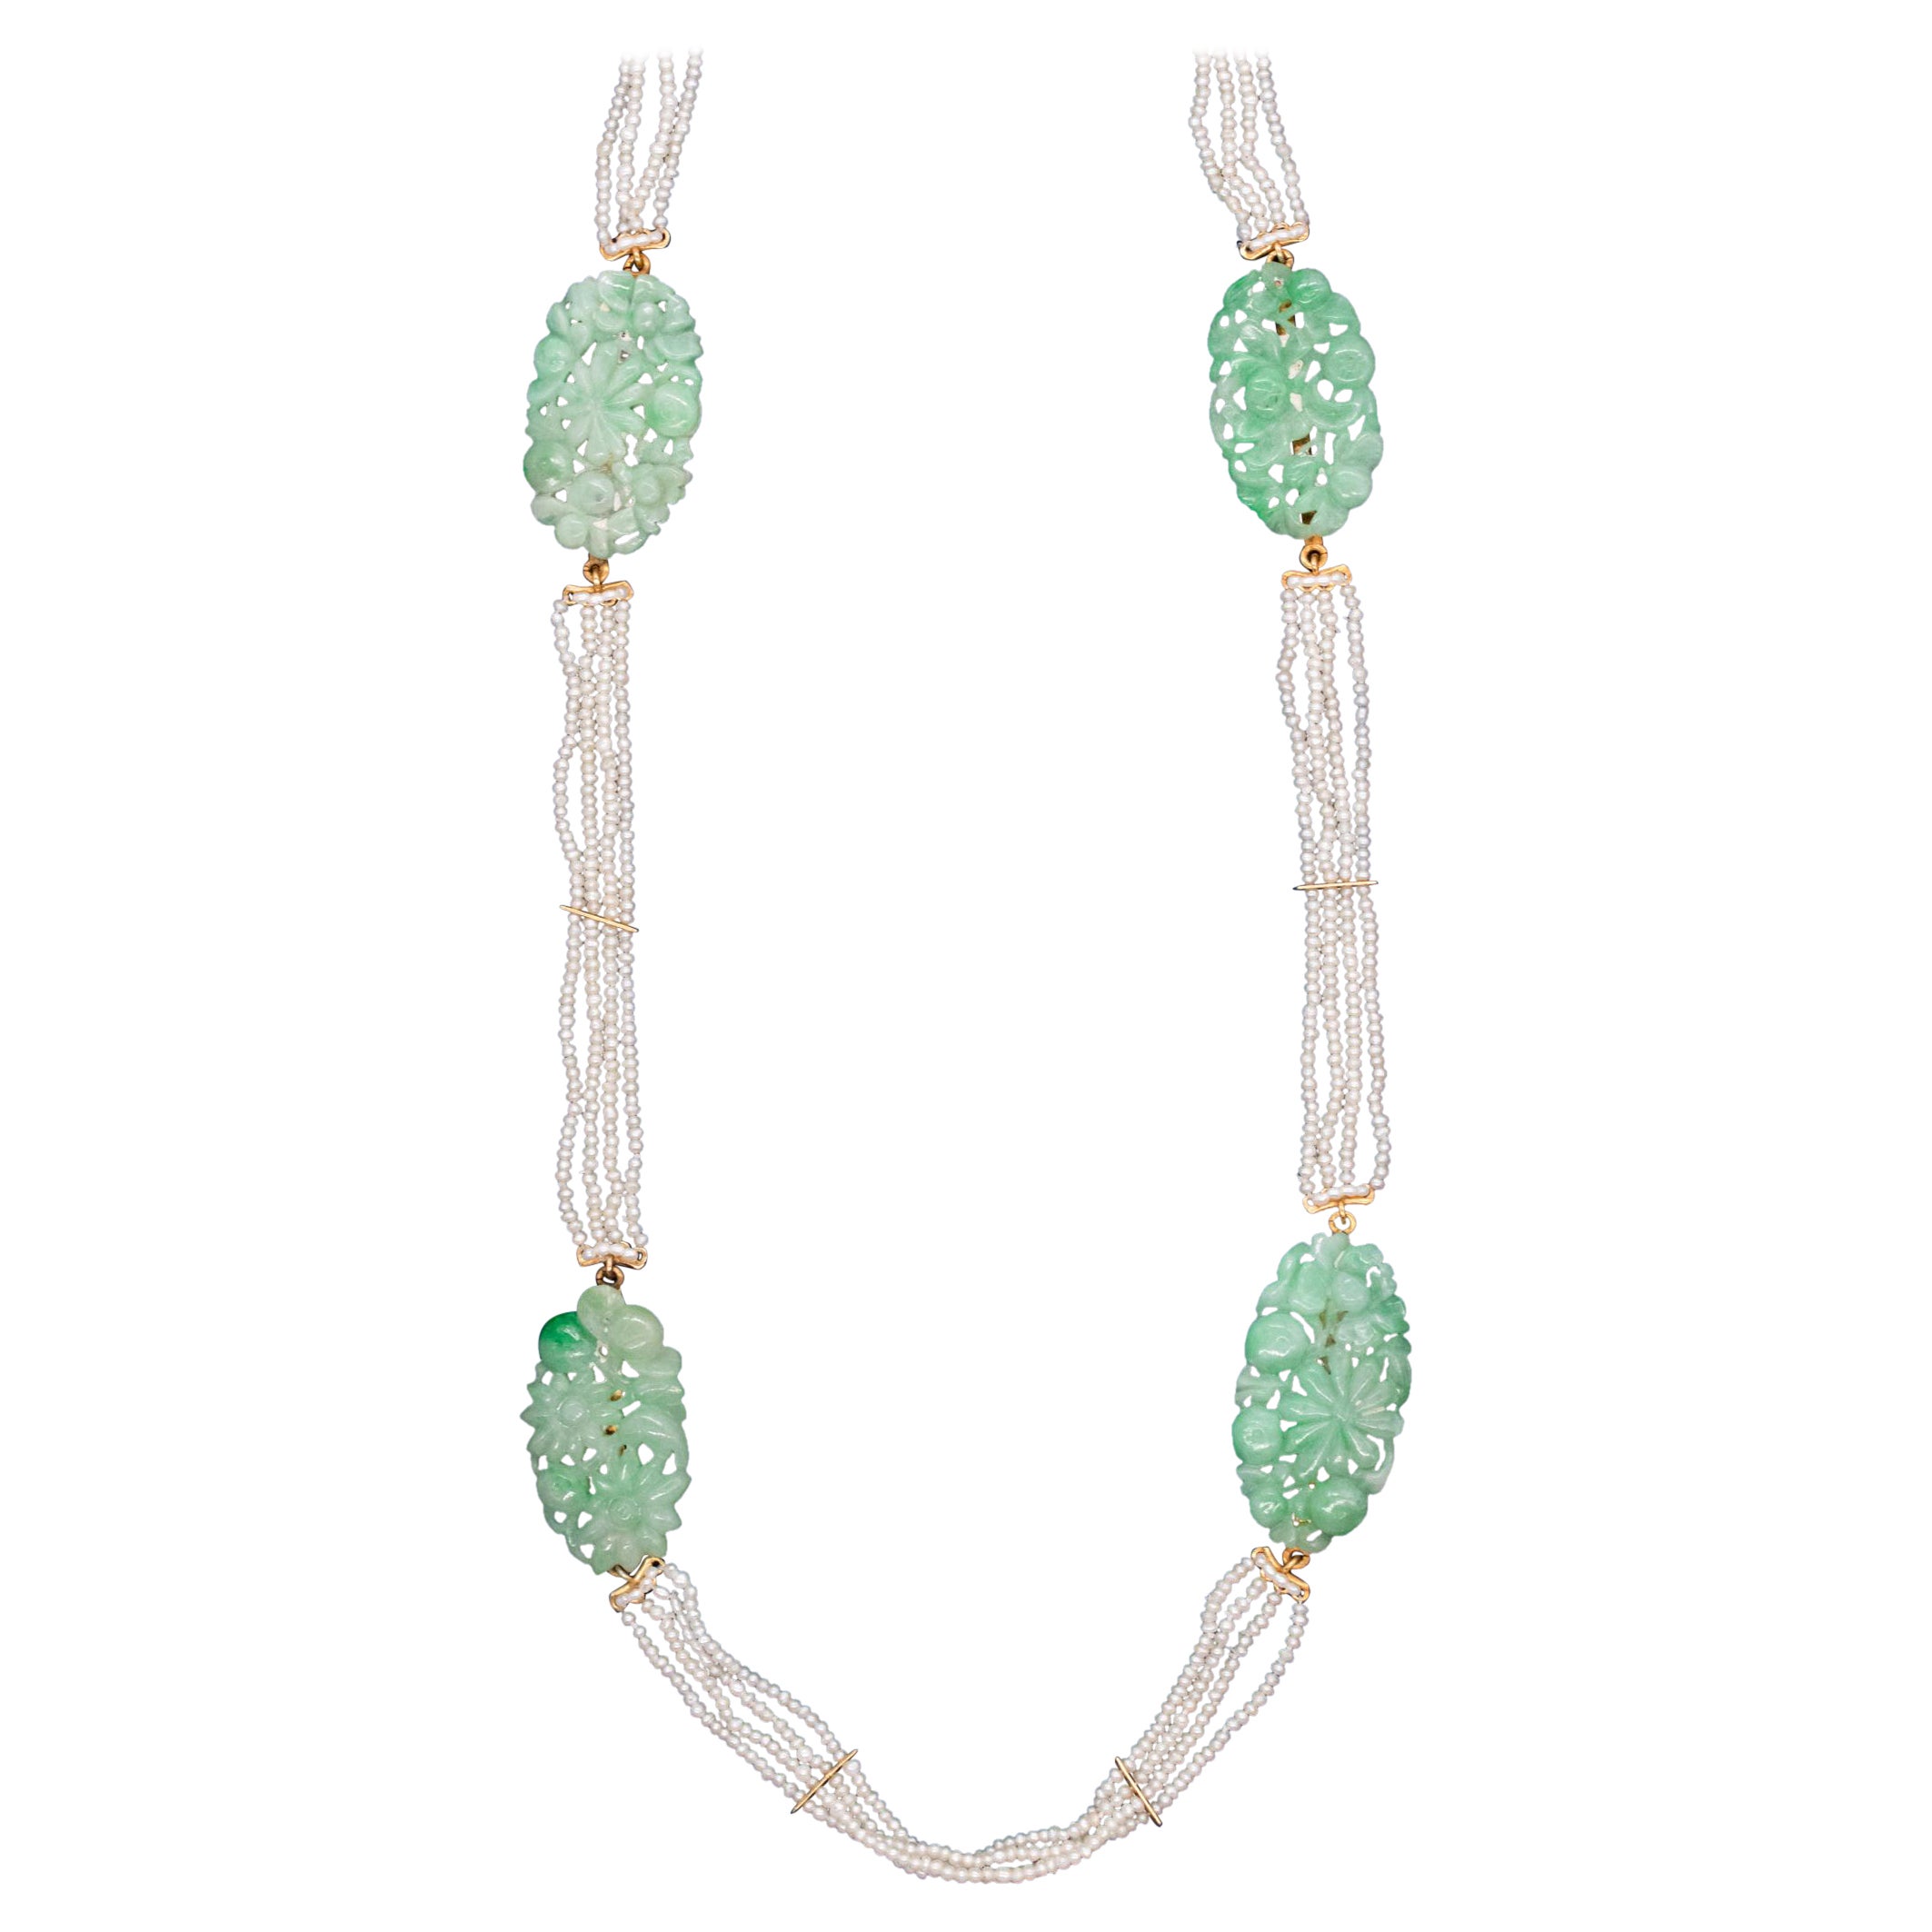 Art Deco 1920 Chinoiserie Long Sautoir In 18Kt Gold Apple Jade And Seed Pearls